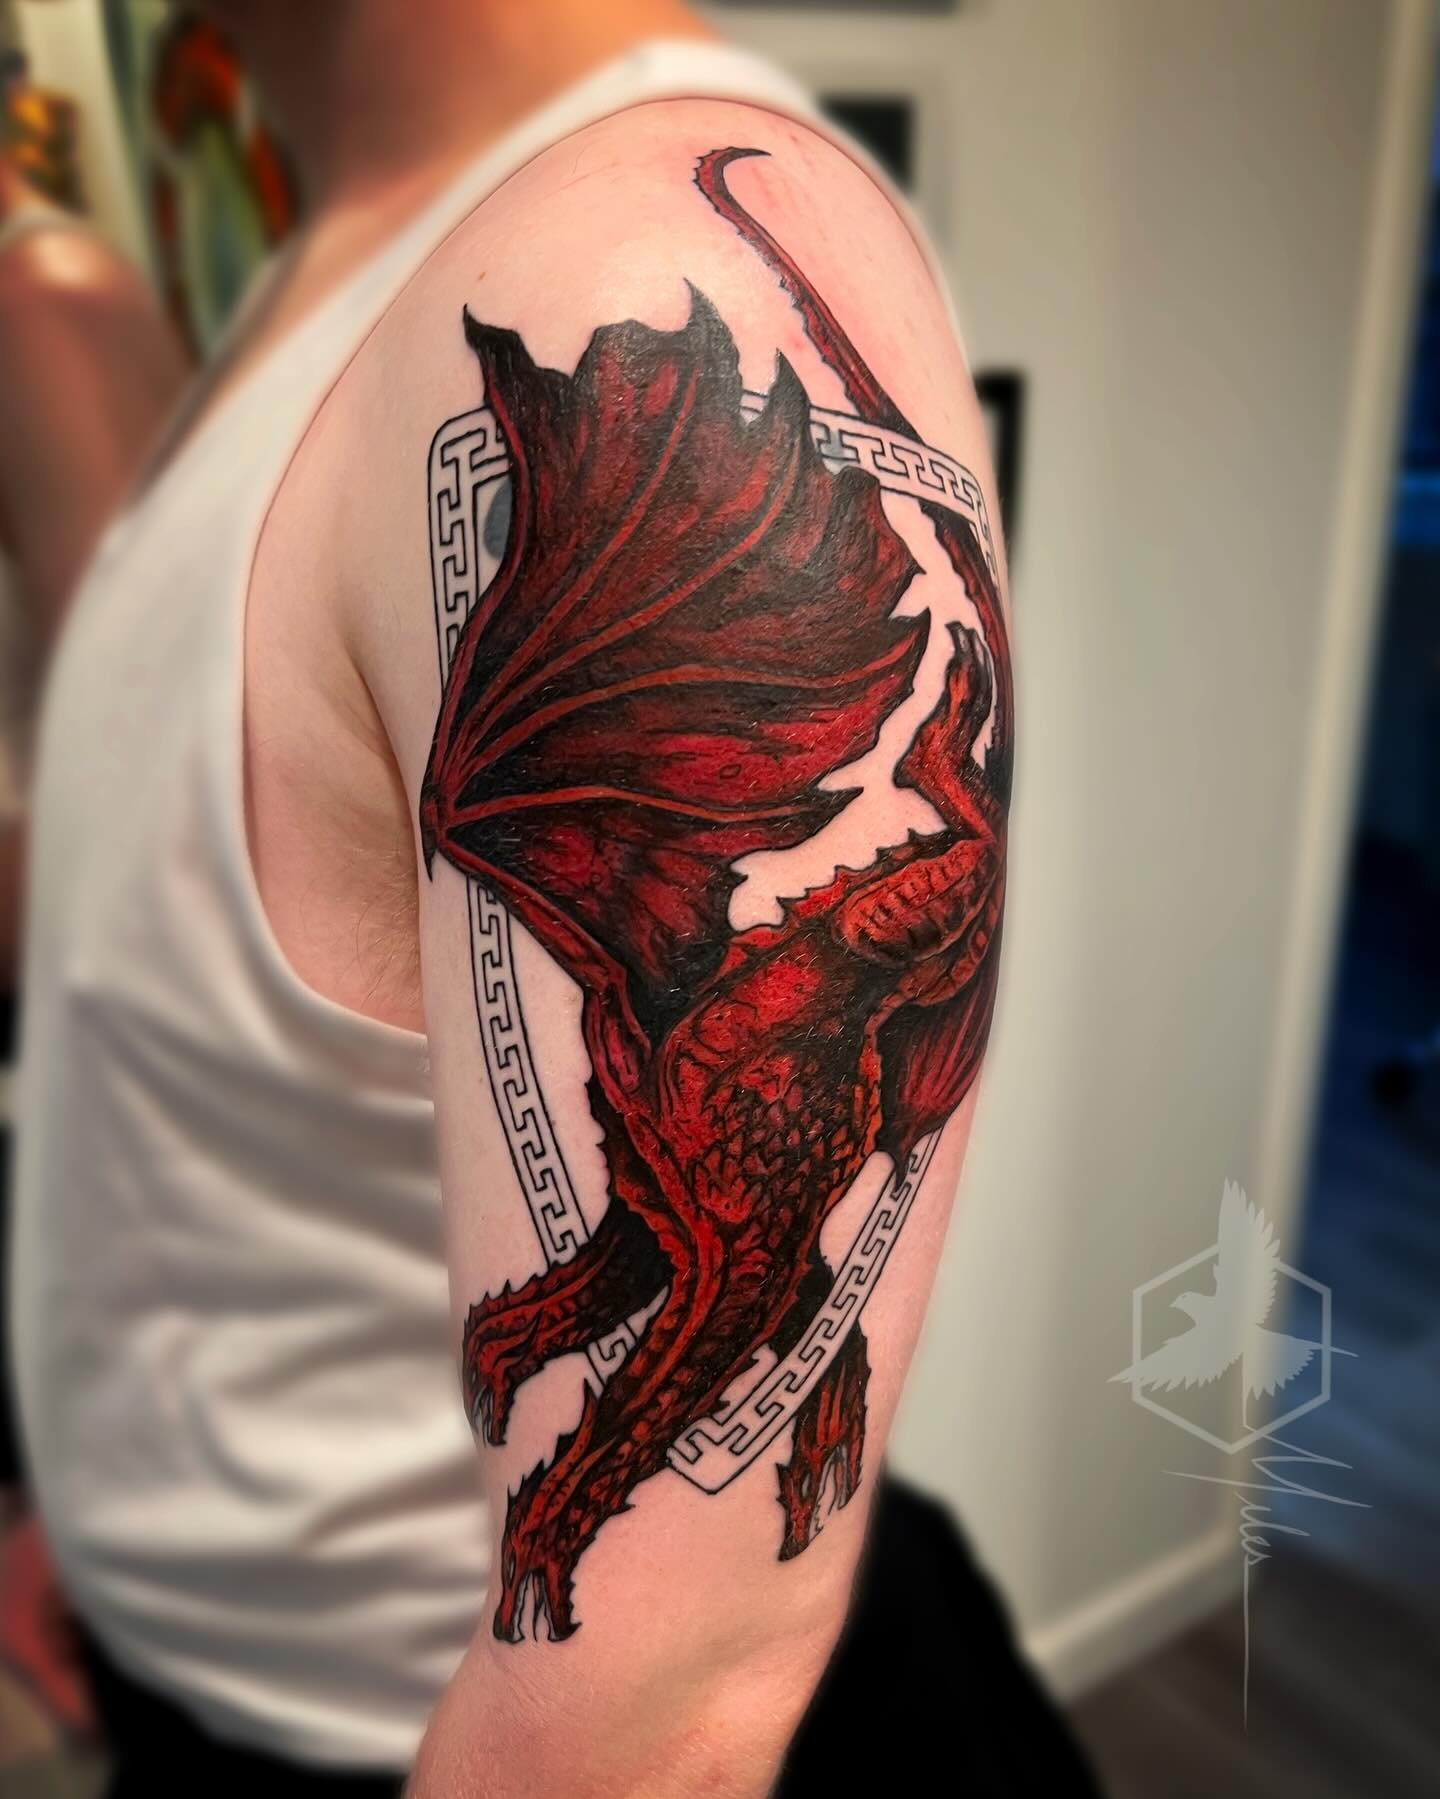 A work in progress on this sleeve starting with a cover up tattoo of the Targaryen sigil from Game Of Thrones.  Thank you for your trust Chris!